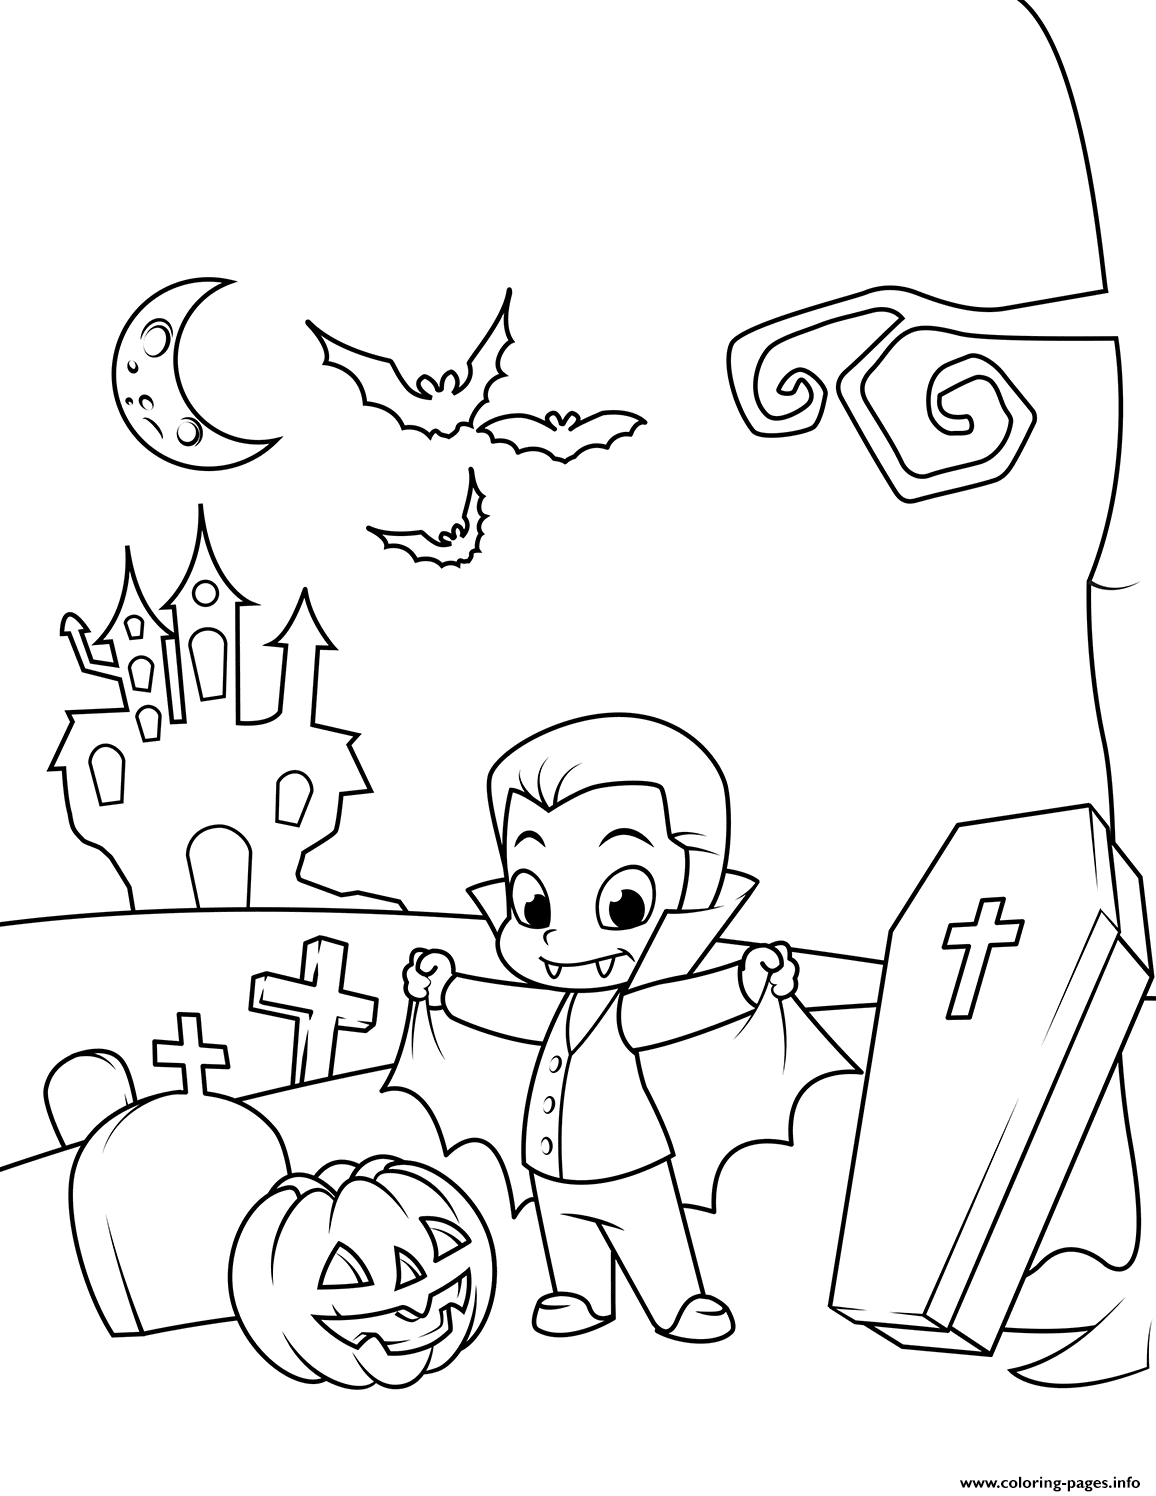 Cute Count Dracula In The Cemetery Halloween Coloring page Printable